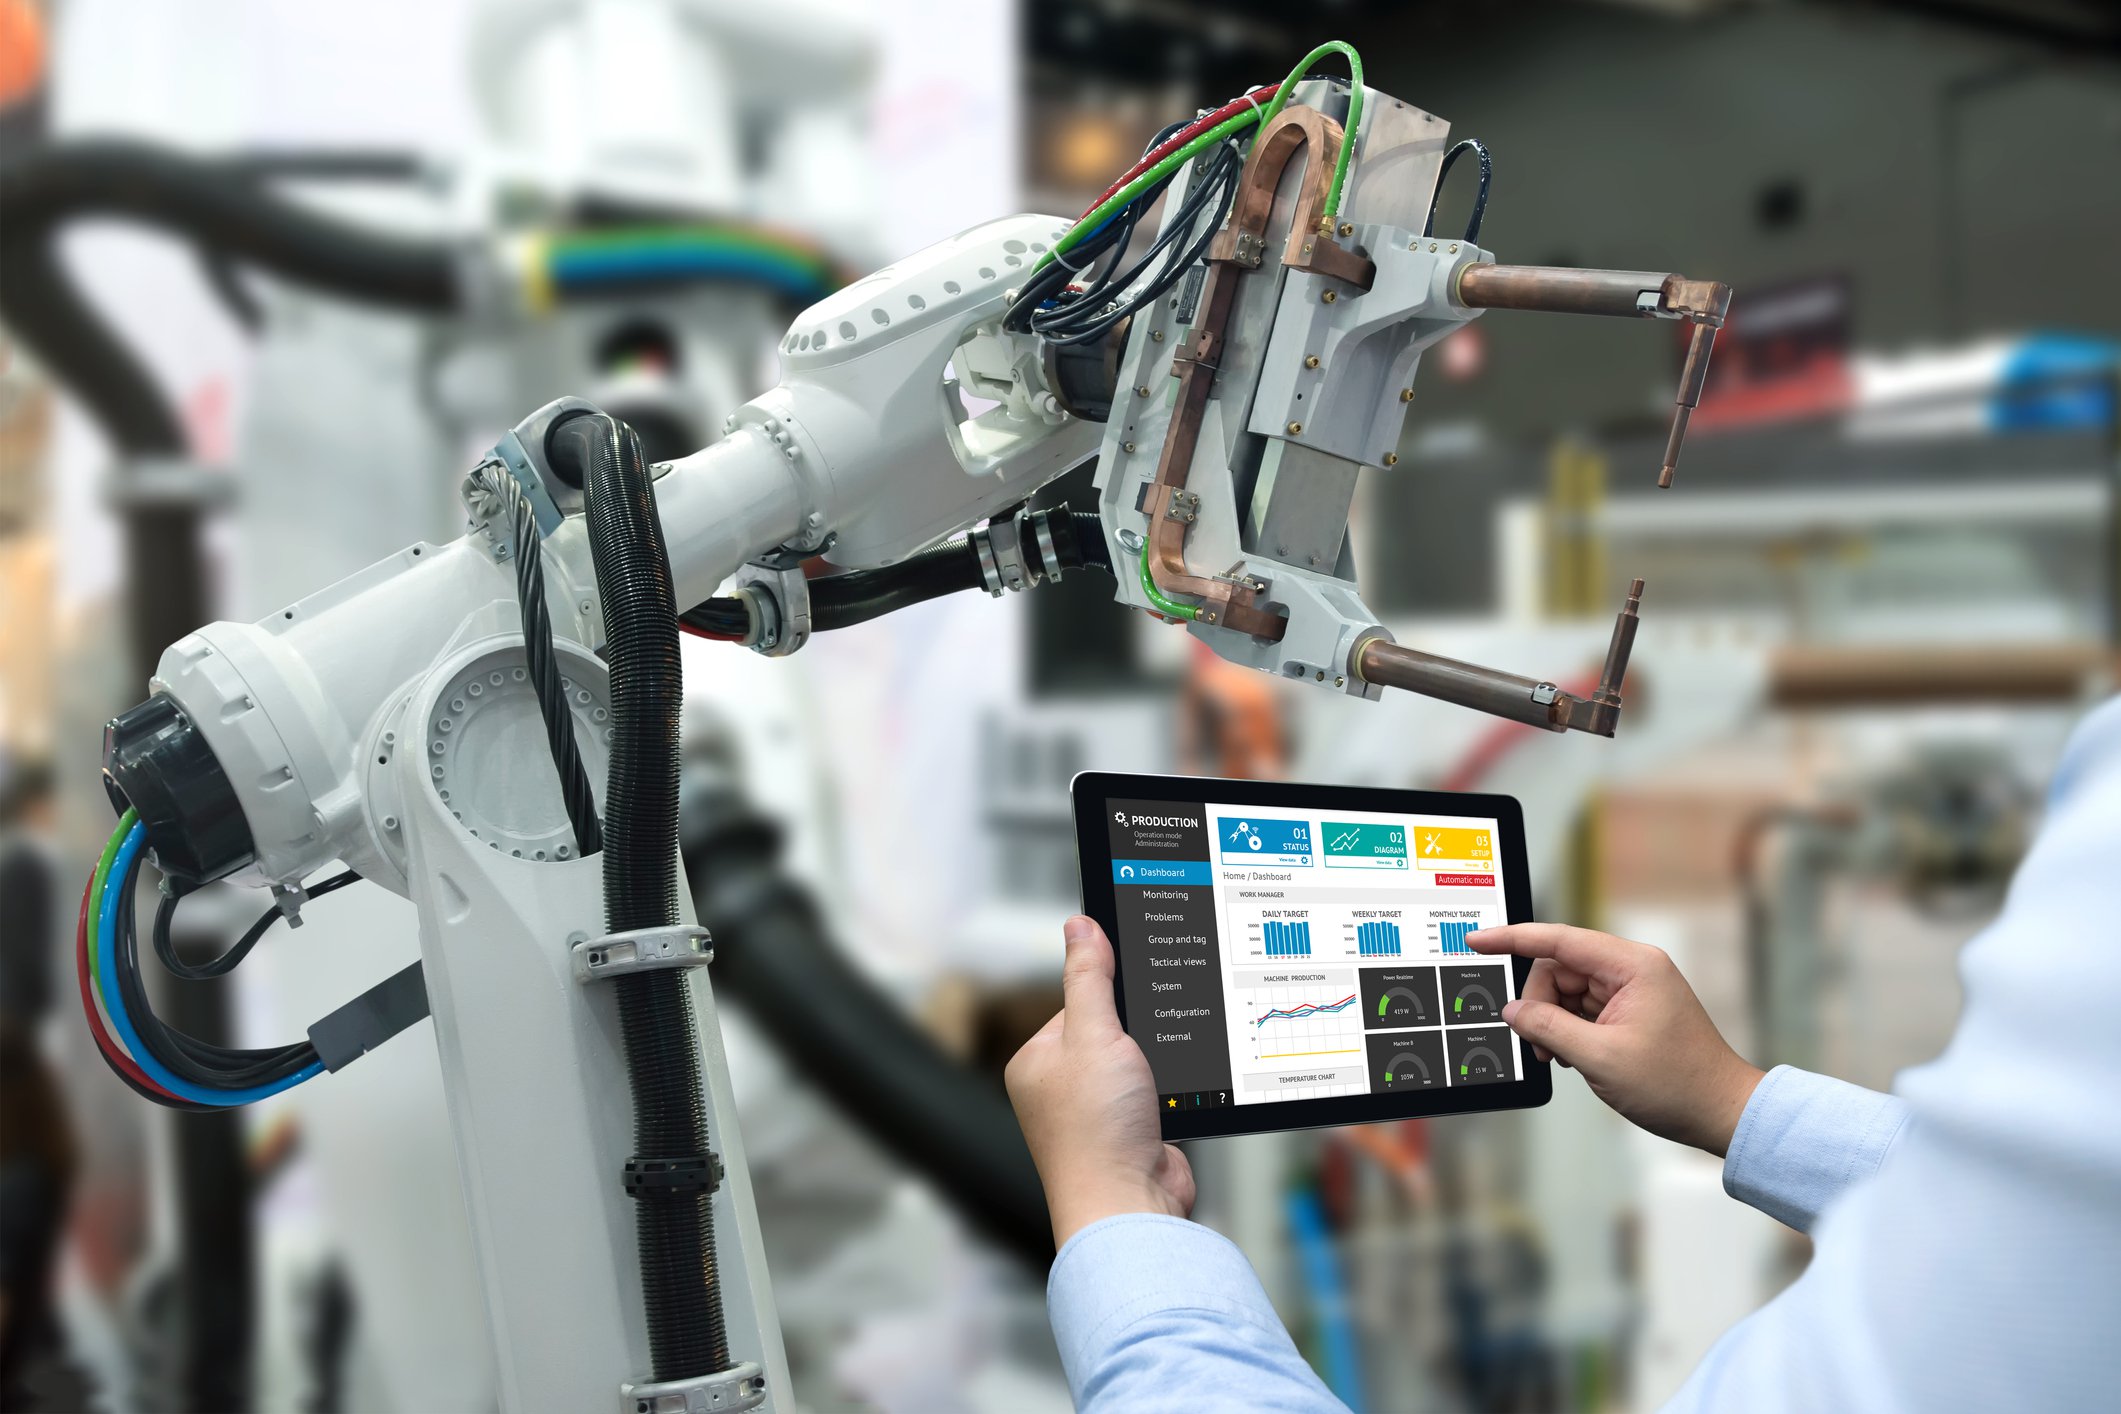 A person holding up a tablet that is controlling an industrial robot